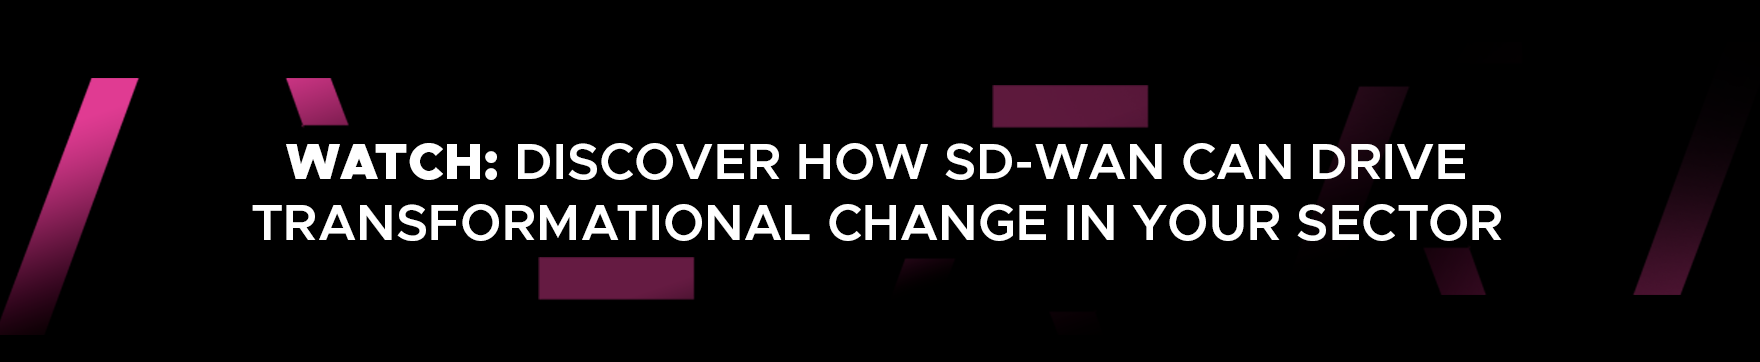 Watch: Discover how SD-WAN can drive transformational change in your sector